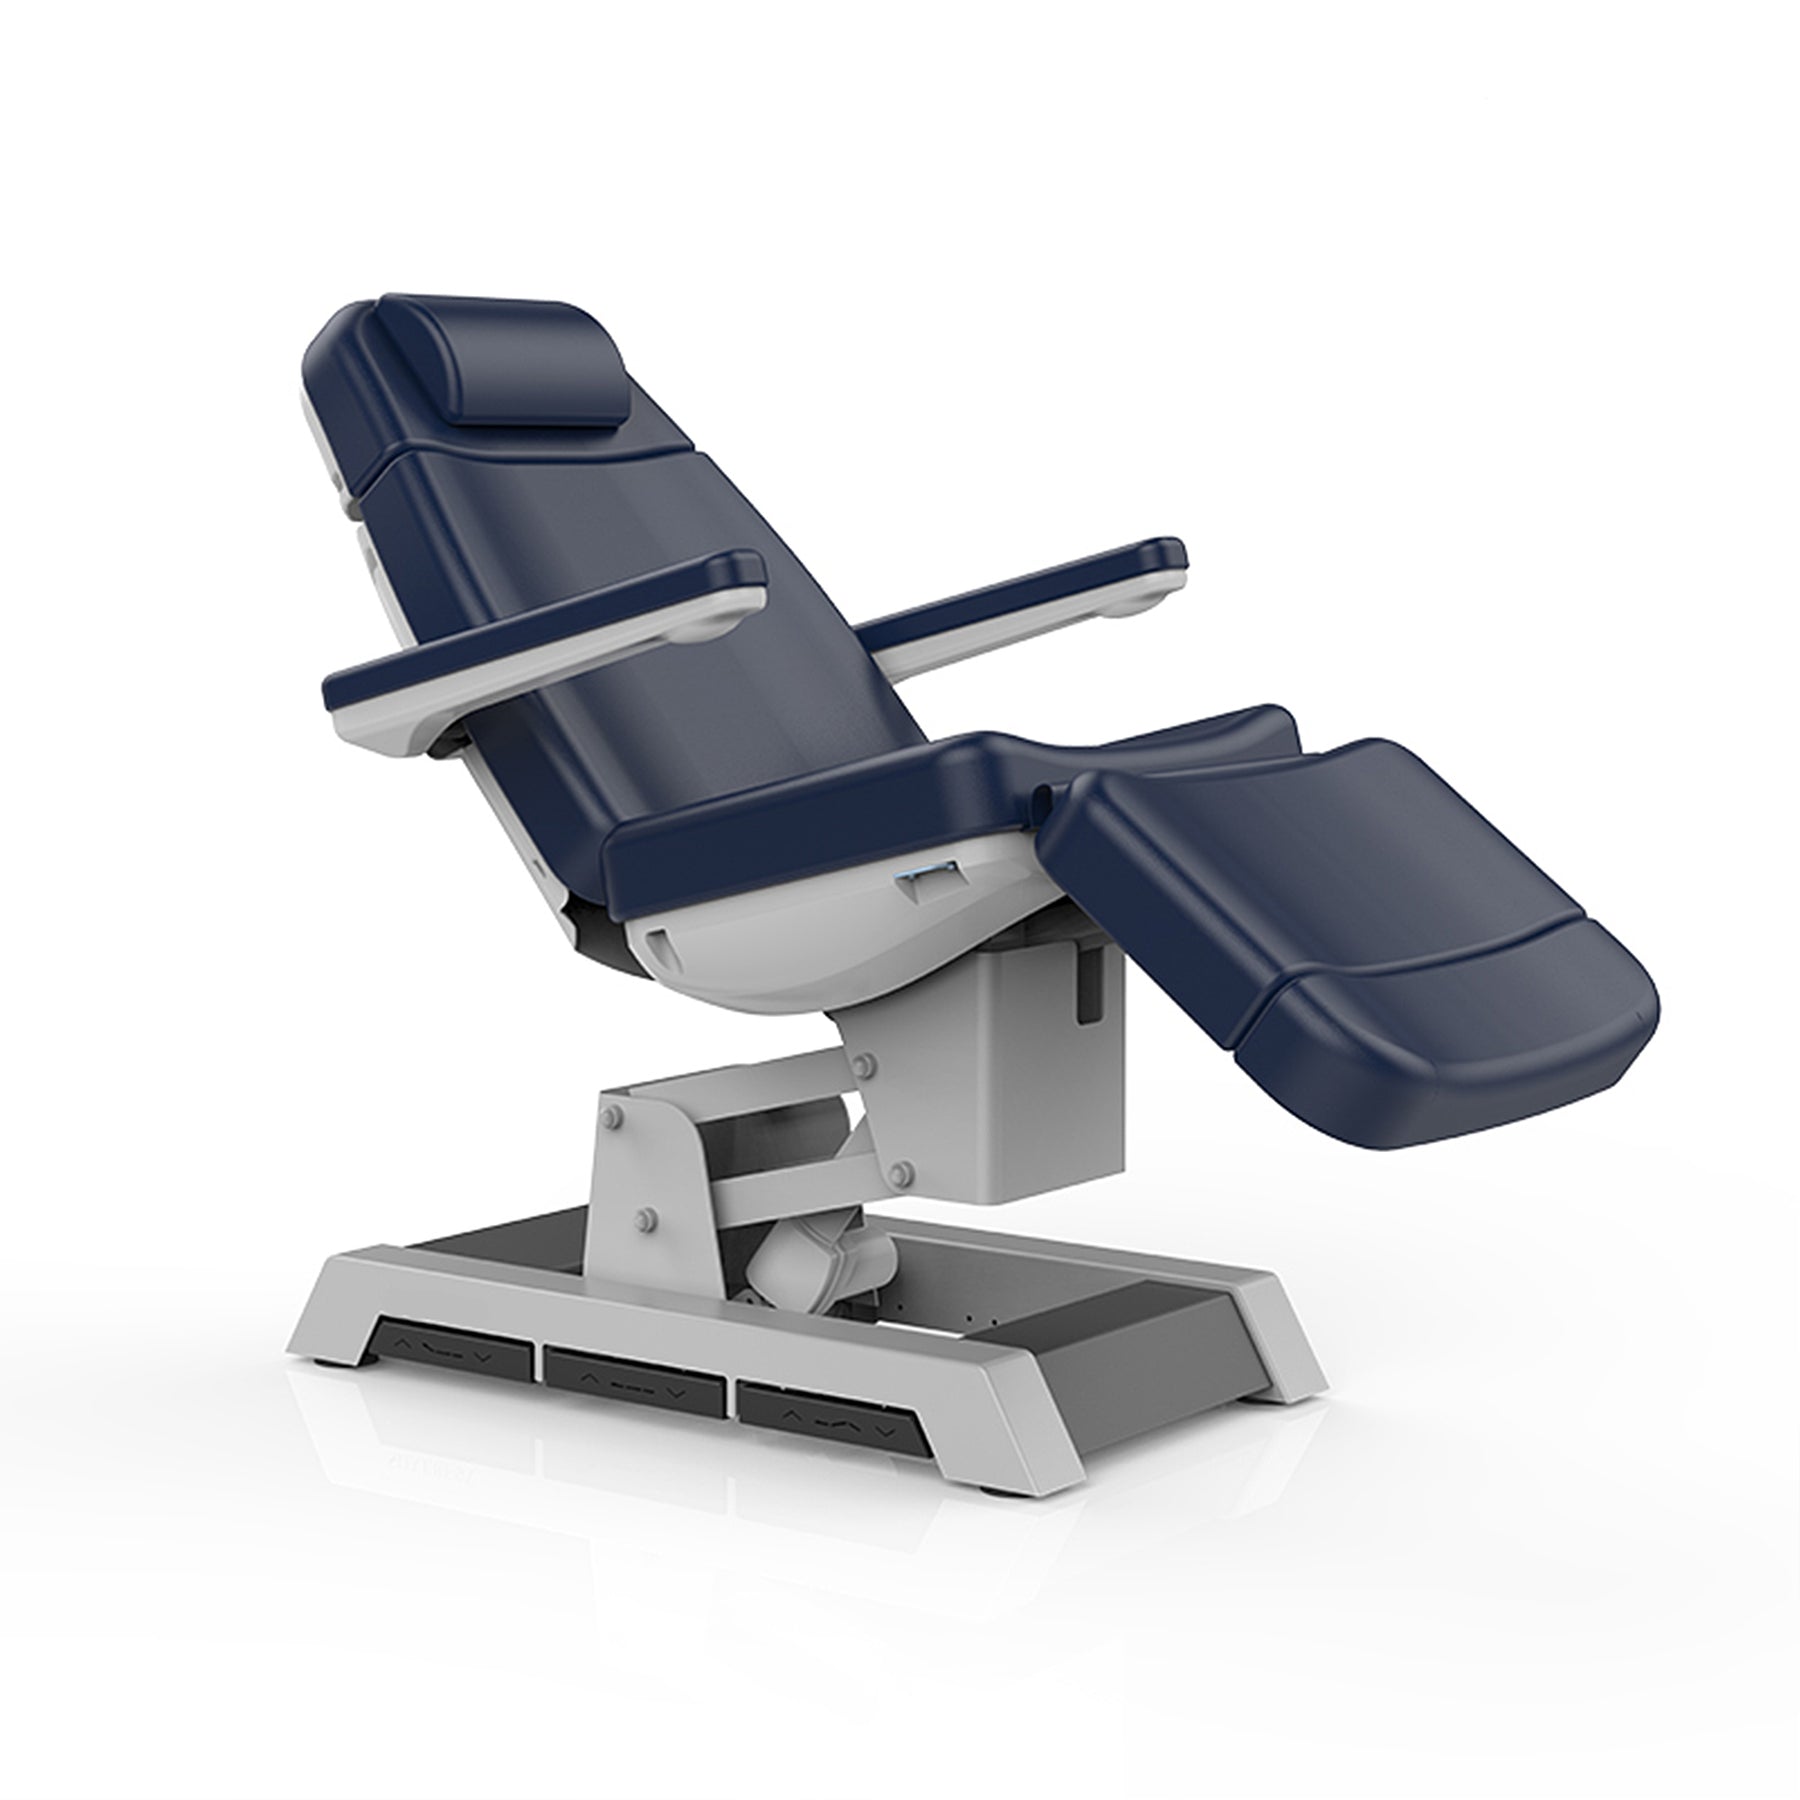 Why Should I Have a Power Medical Procedure Table?